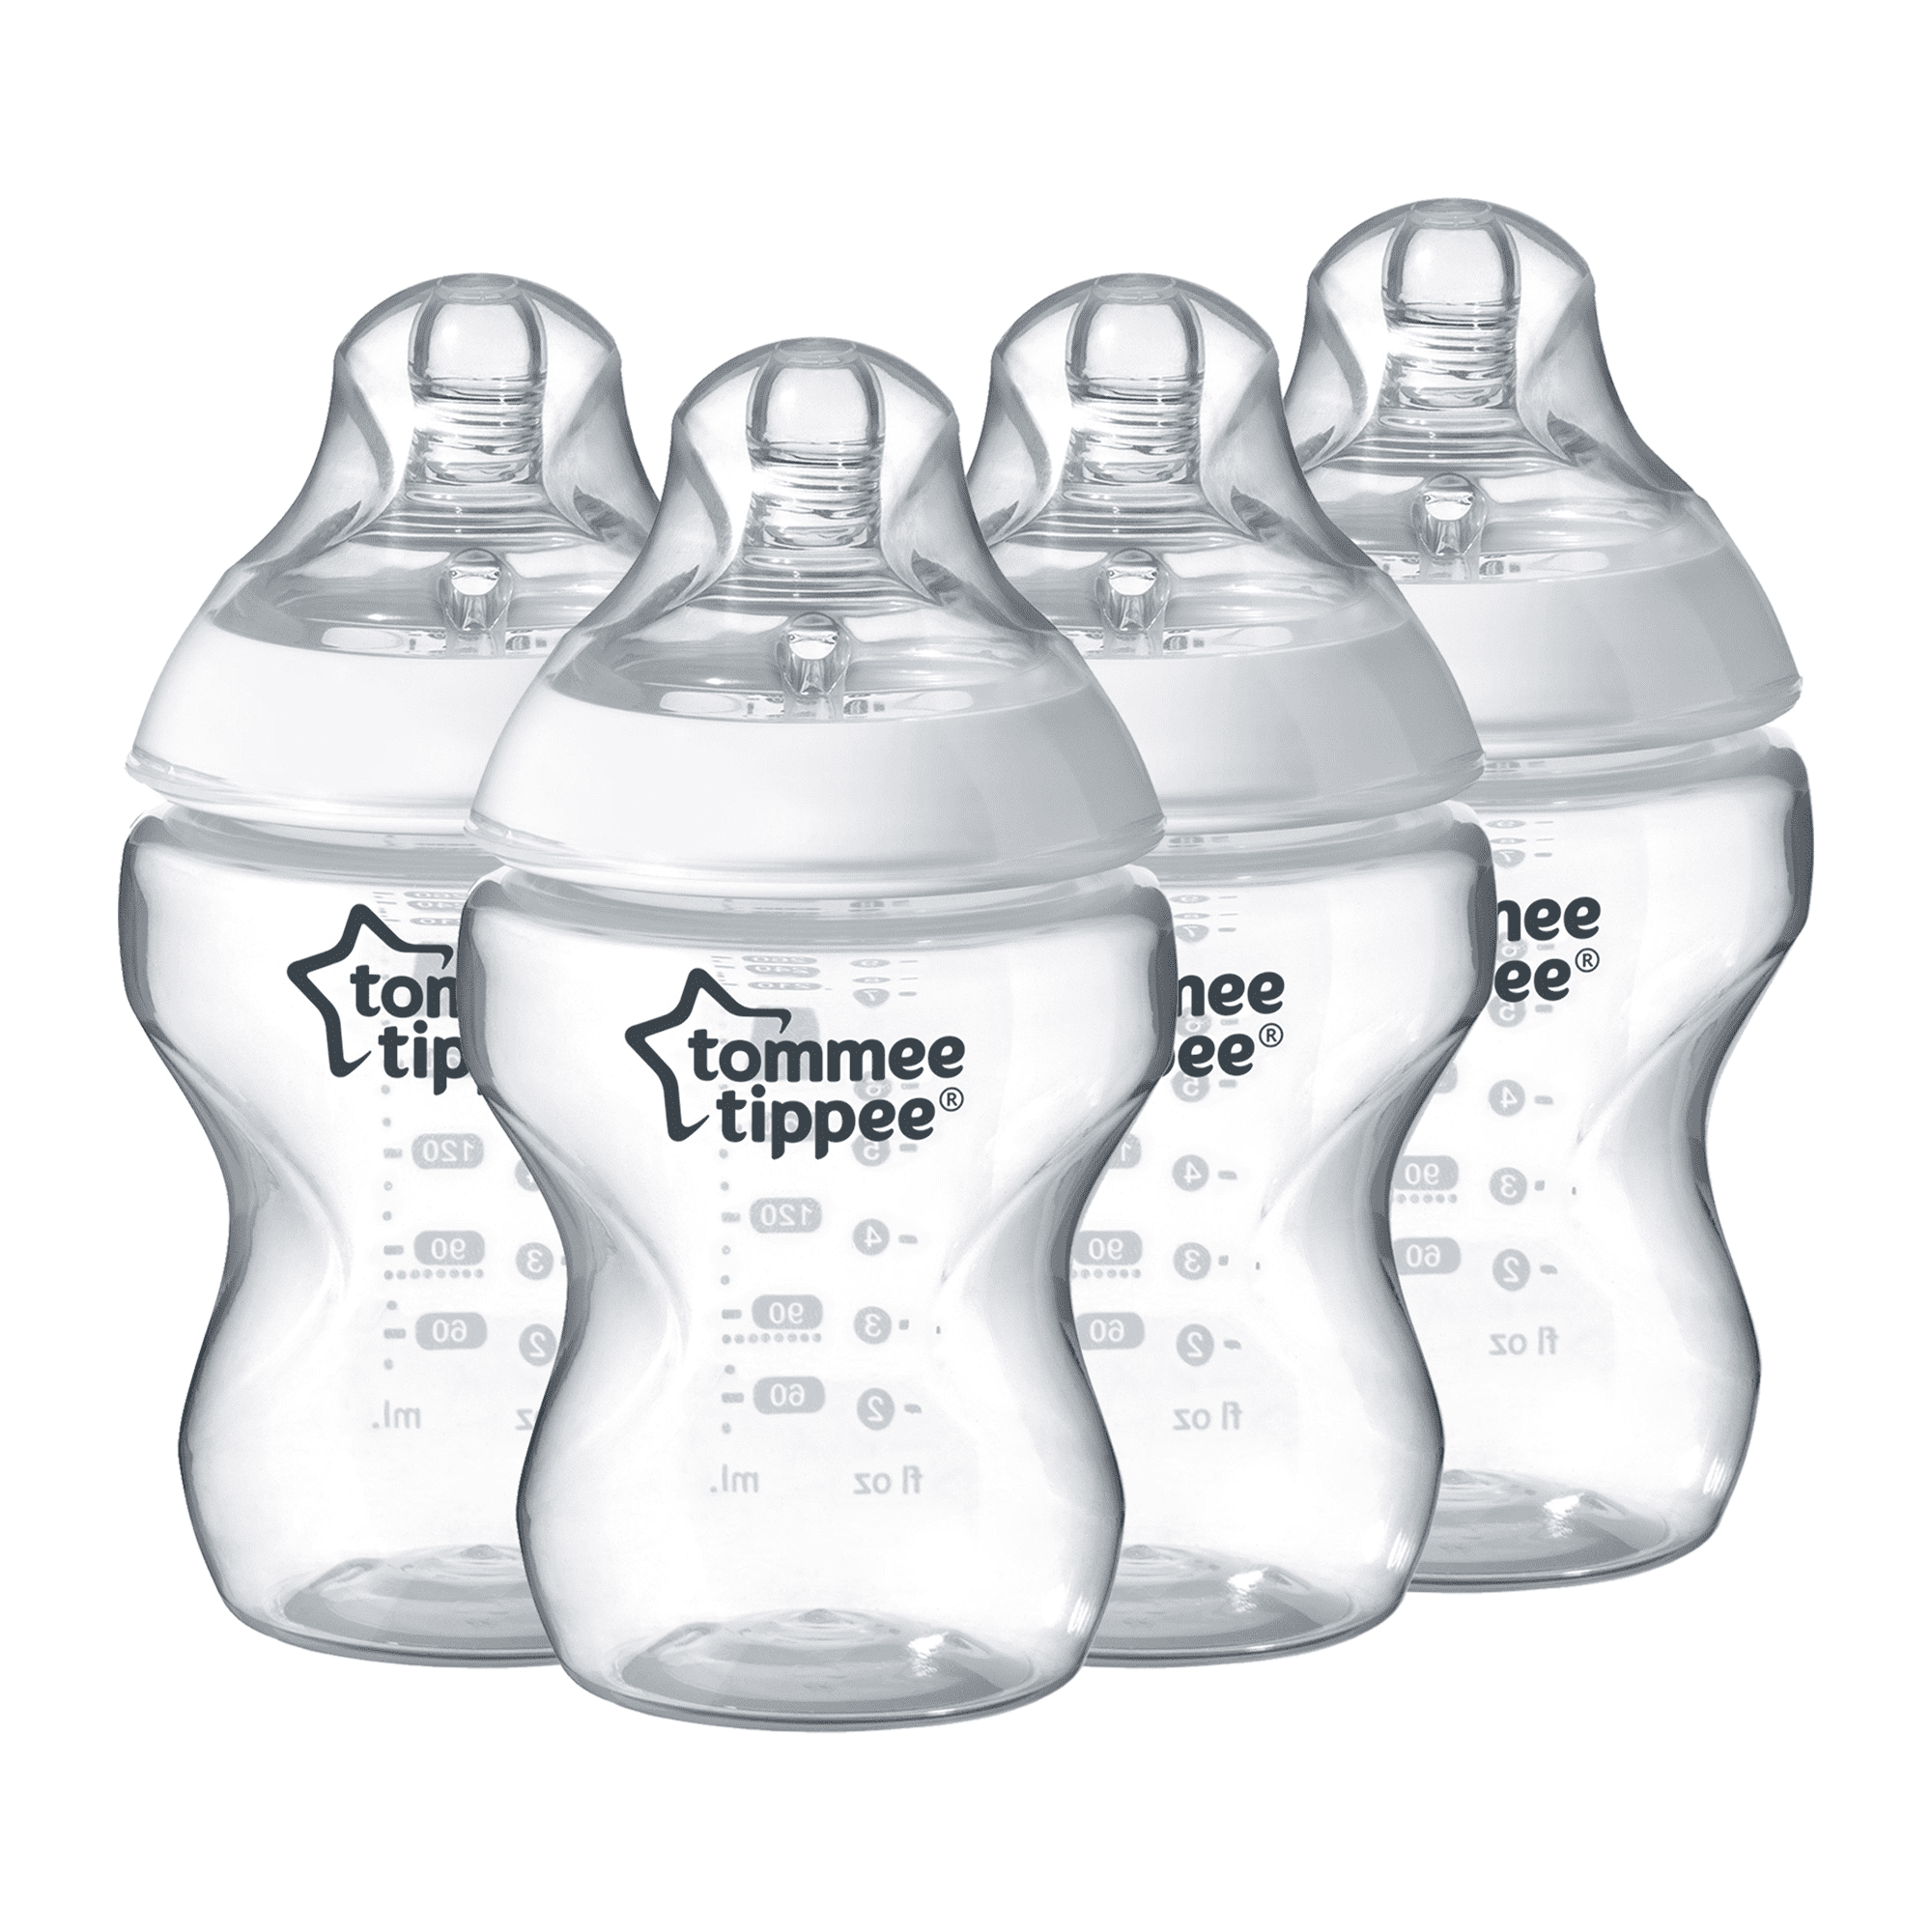 Tommee Tippee Closer to Nature Baby Bottle